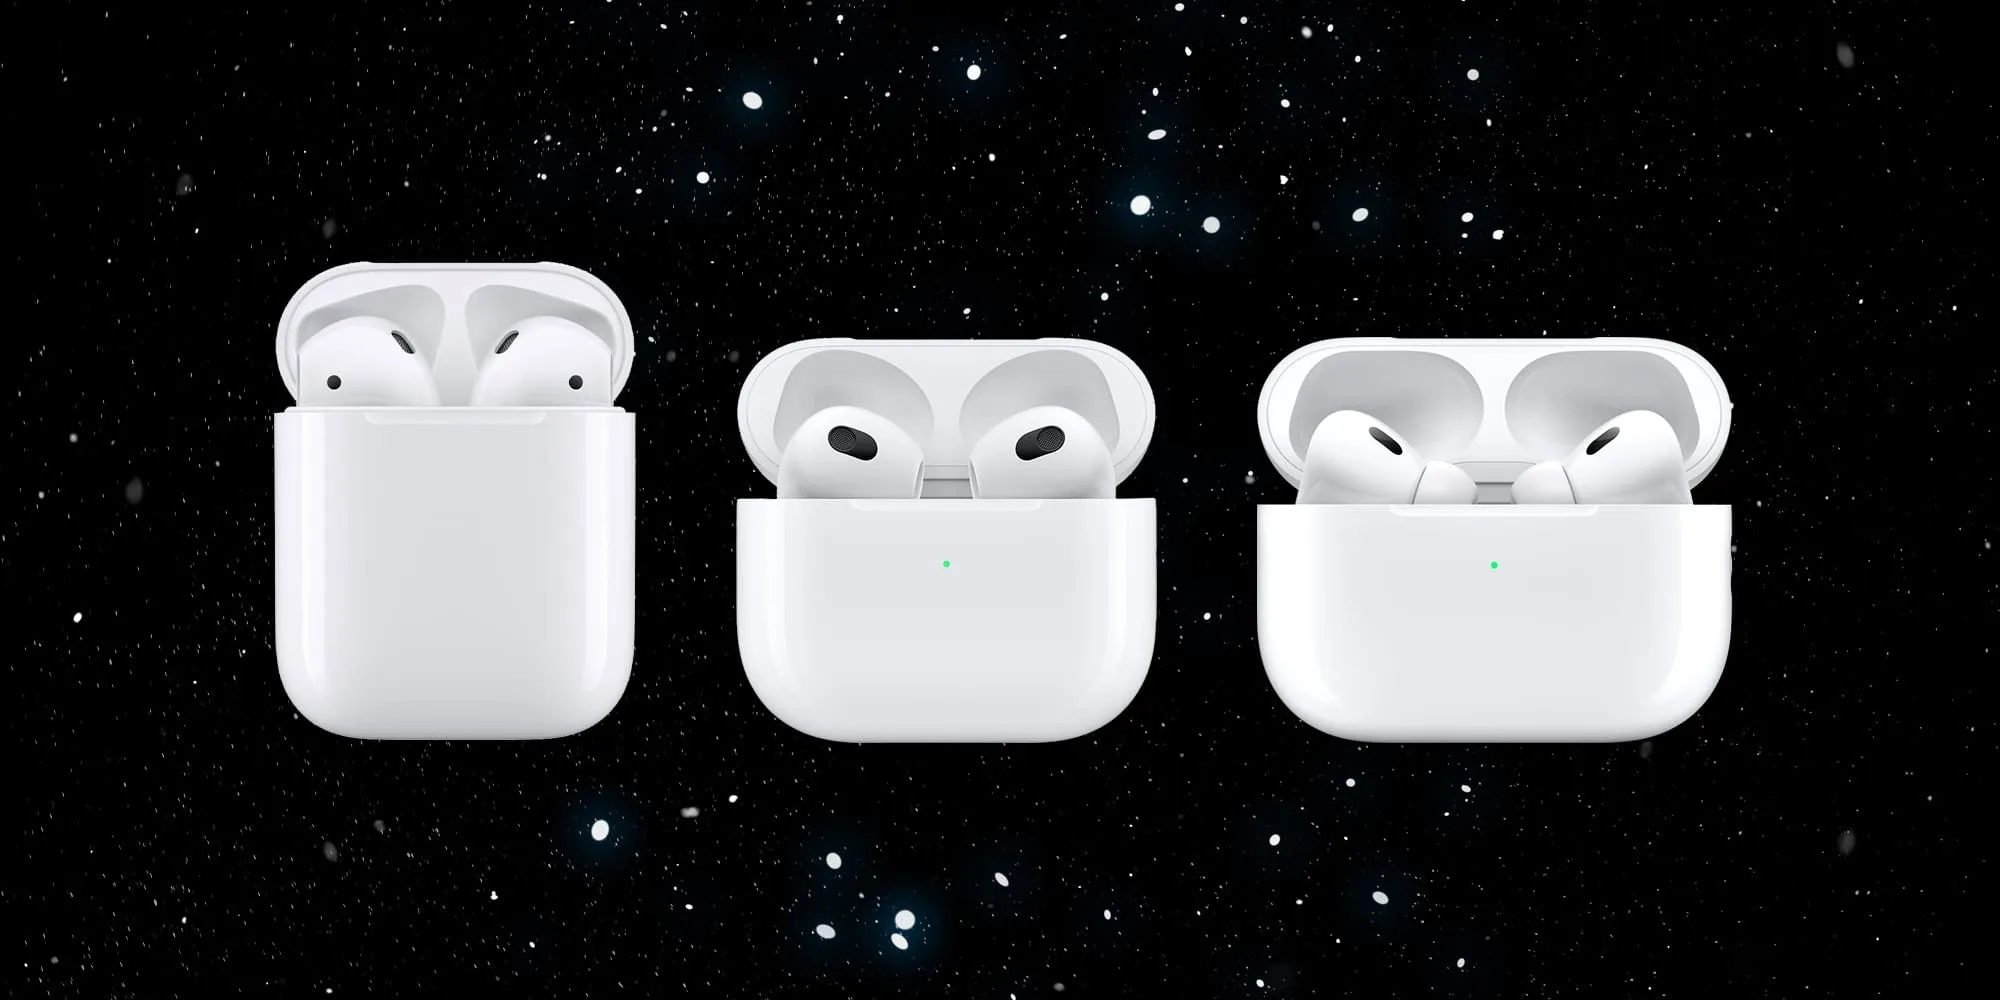 AirPods Pro 2 vs AirPods Pro, AirPods 2/3: Which are the best choice this holiday season?